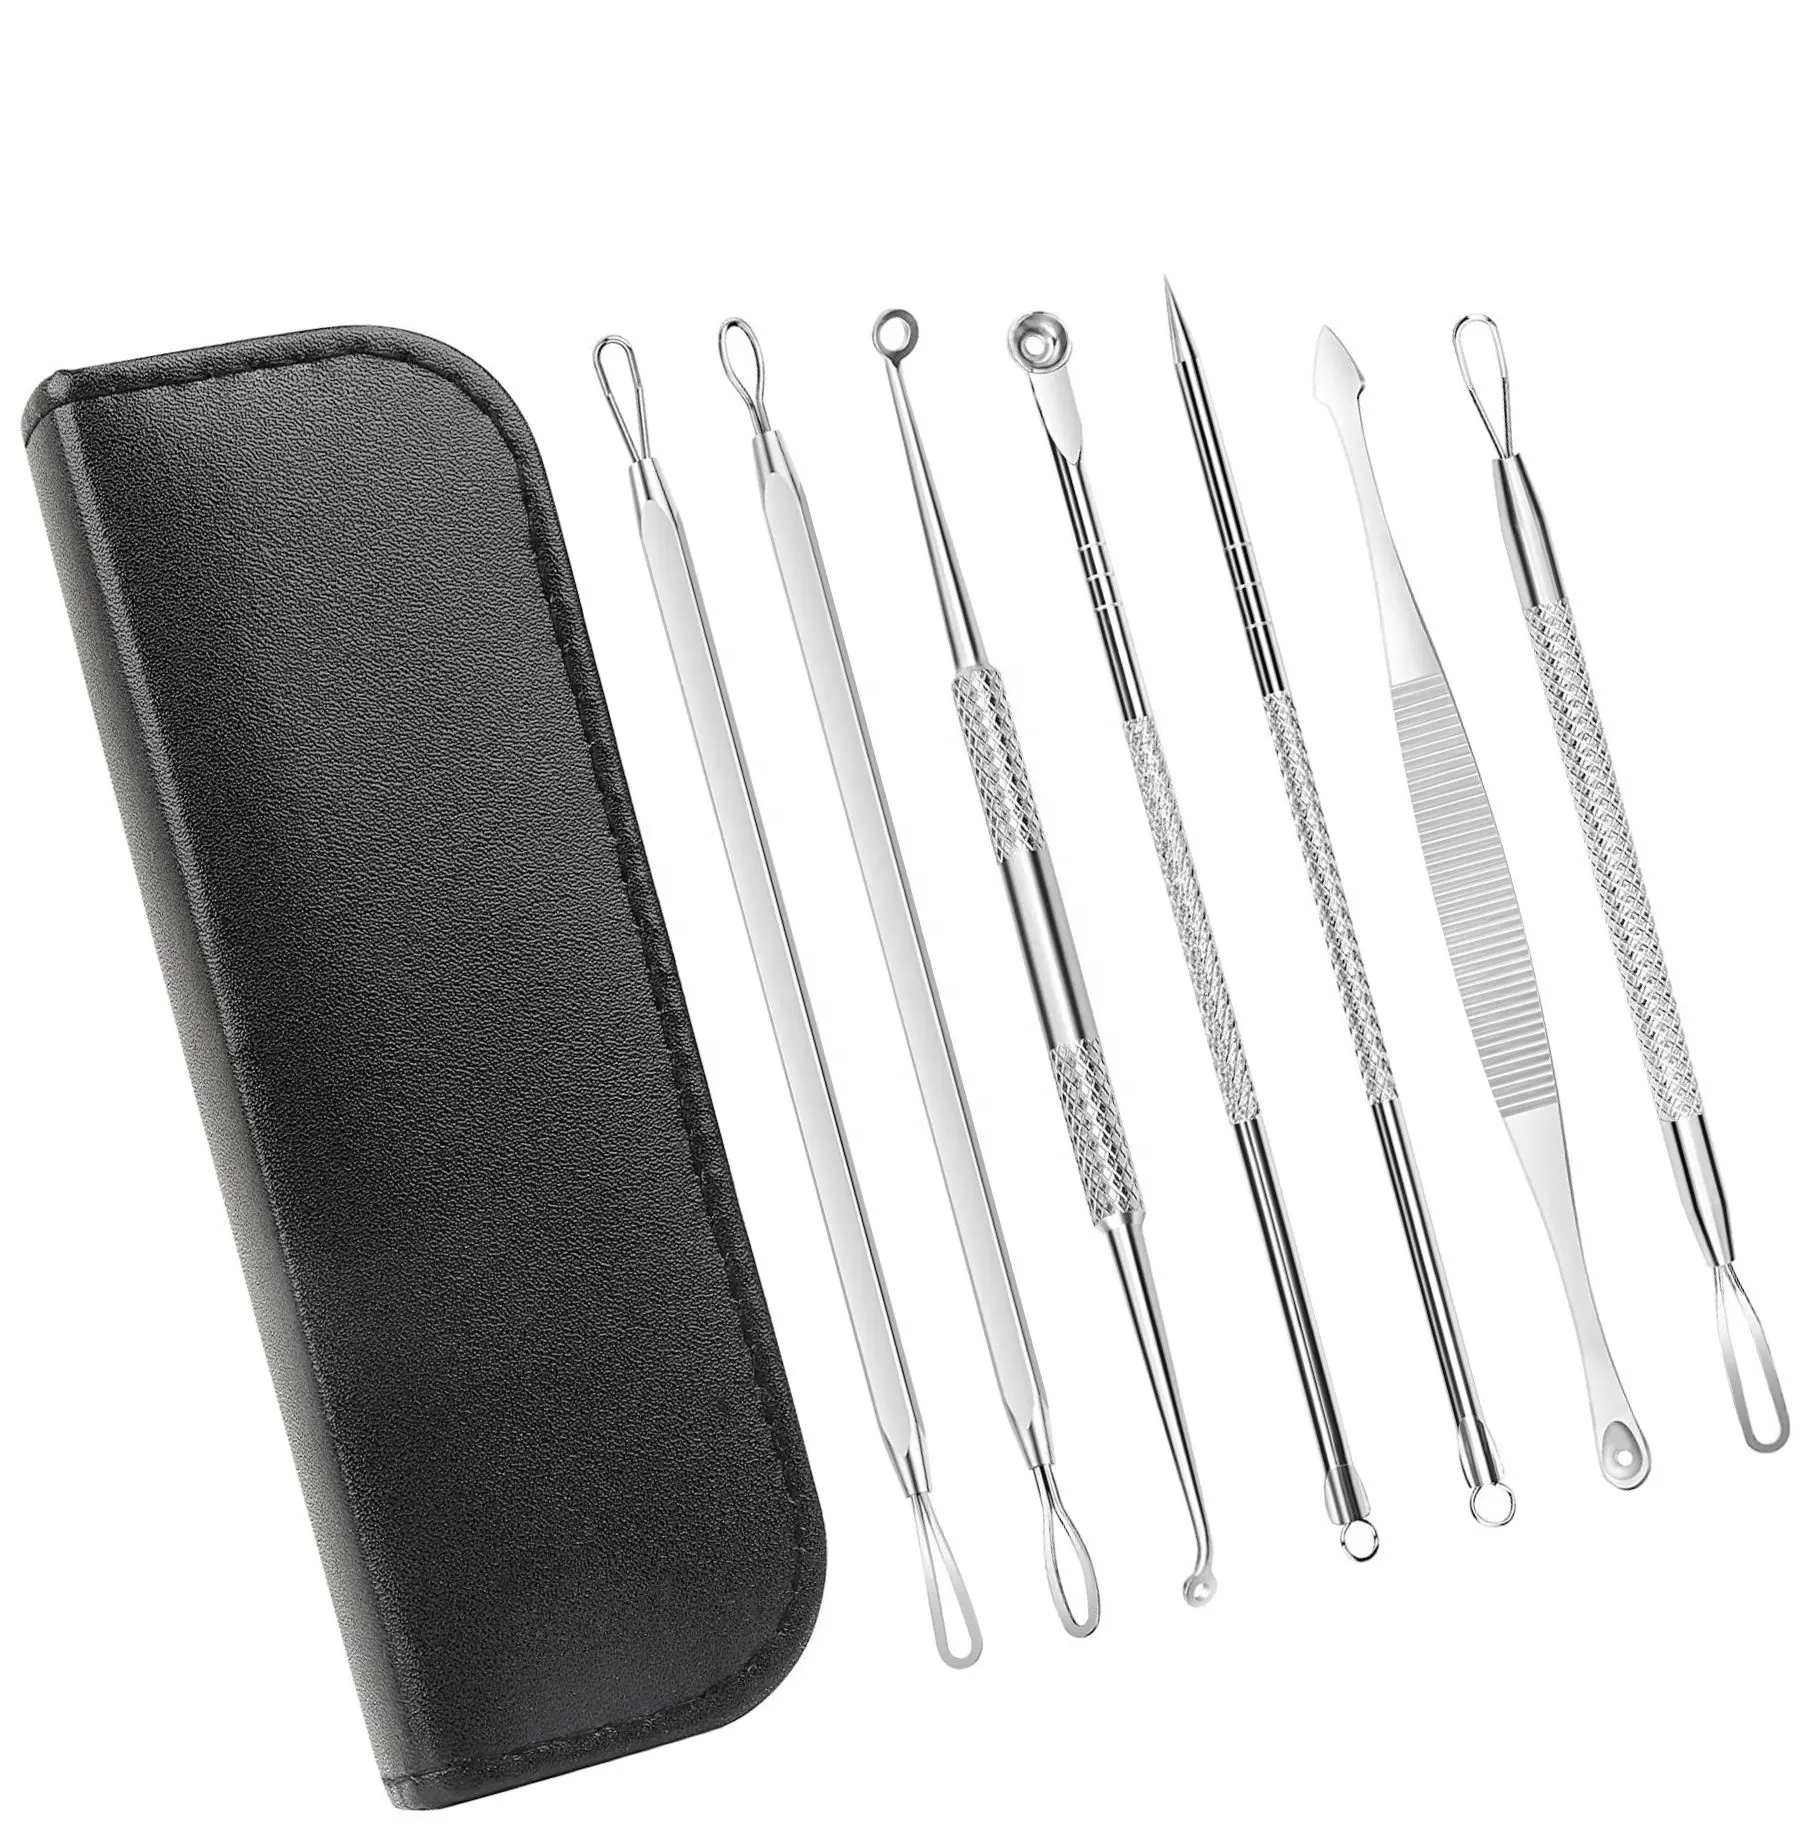 Pimple Blackhead Remover Extractor Tool Kit 7 in 1 Professional Safe Treatment White Head Acne Blemish Comedone Removing